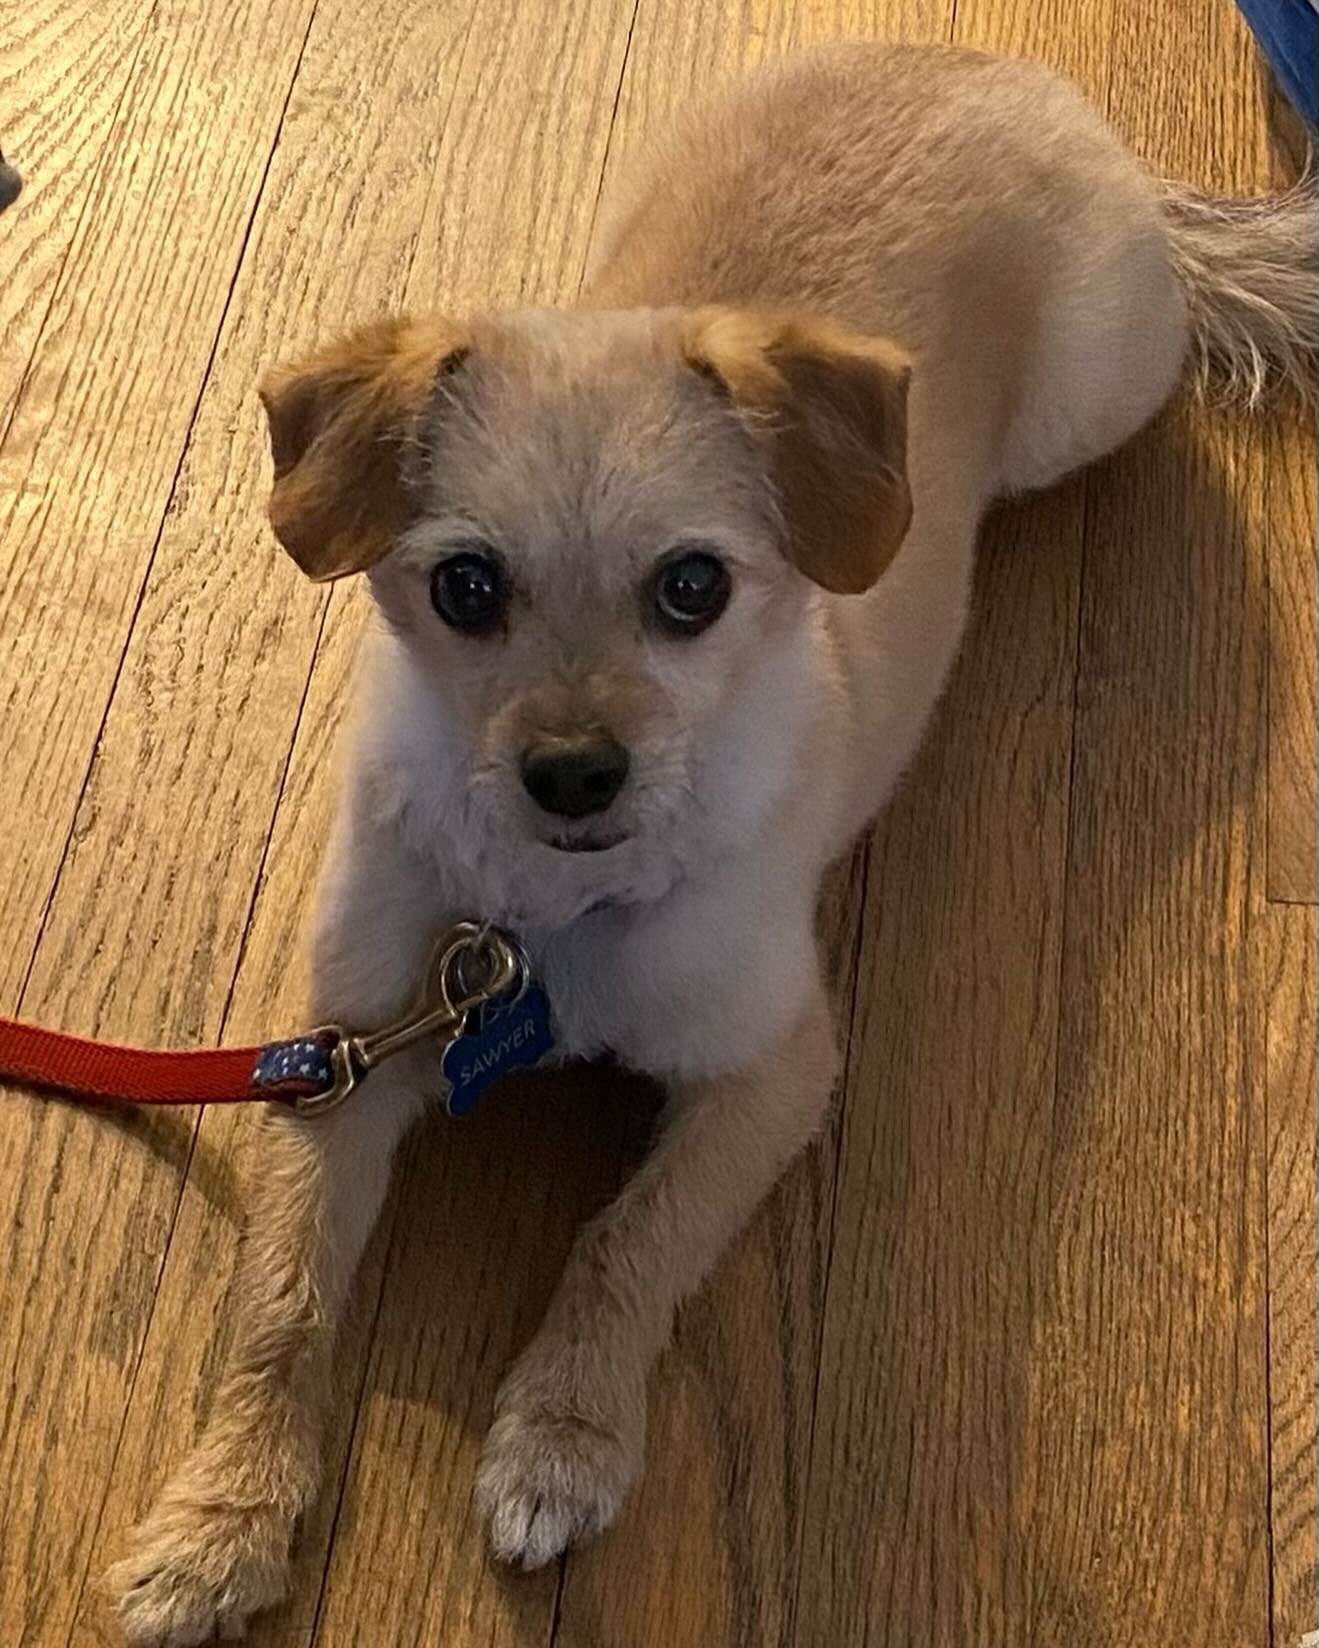 Say Hello to Sawyer! A 5 yr old Terrier mix who has made the long trek to Seattle to live with his owner in an eventual assisted living home. He barks to new visitors, weary with small children but does fantastic in public settings and hotels. Educat